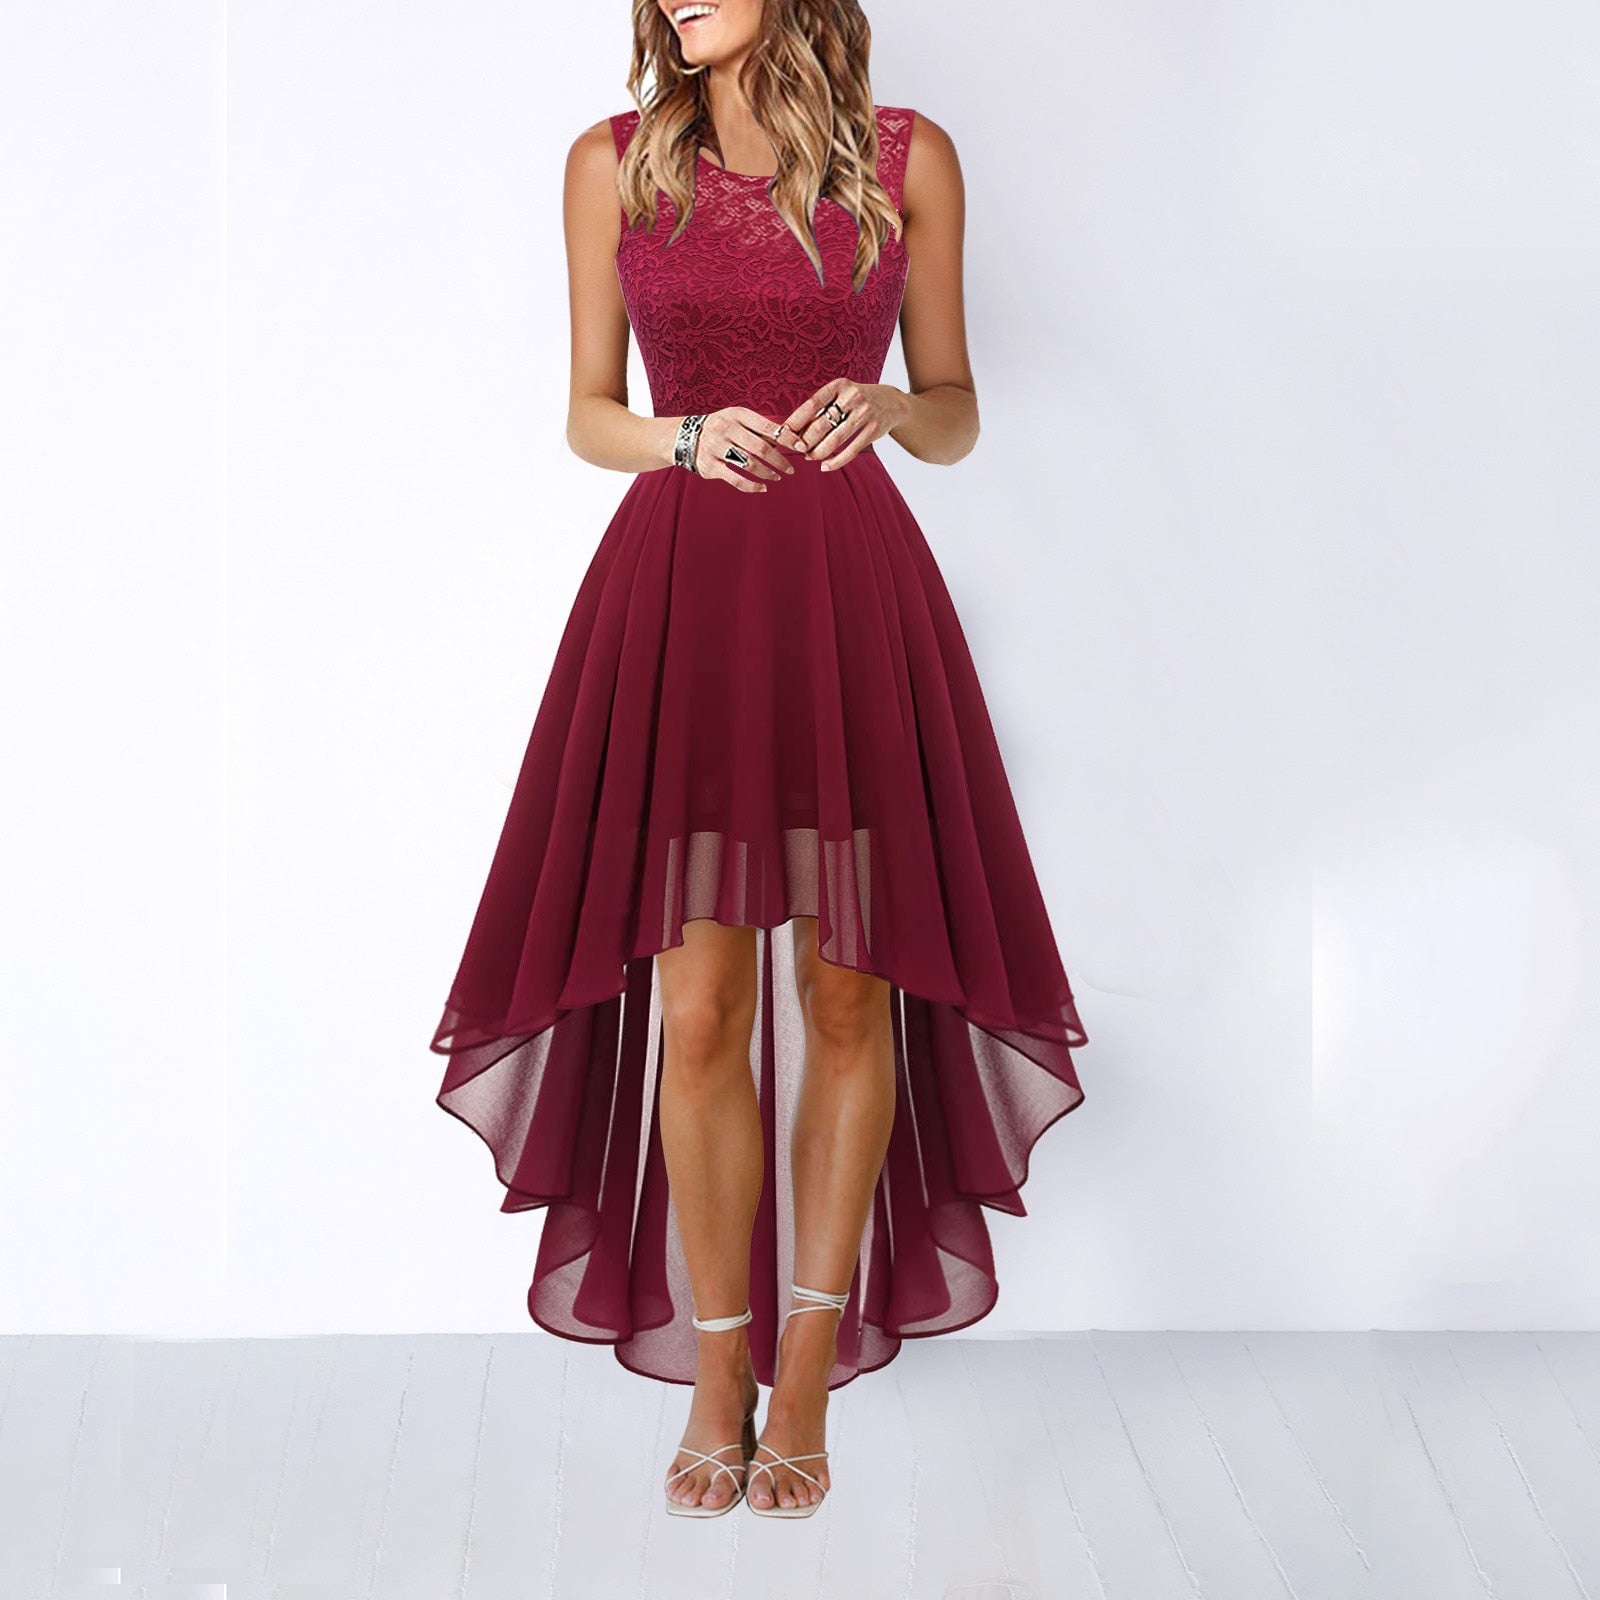 Red high low dresses formal